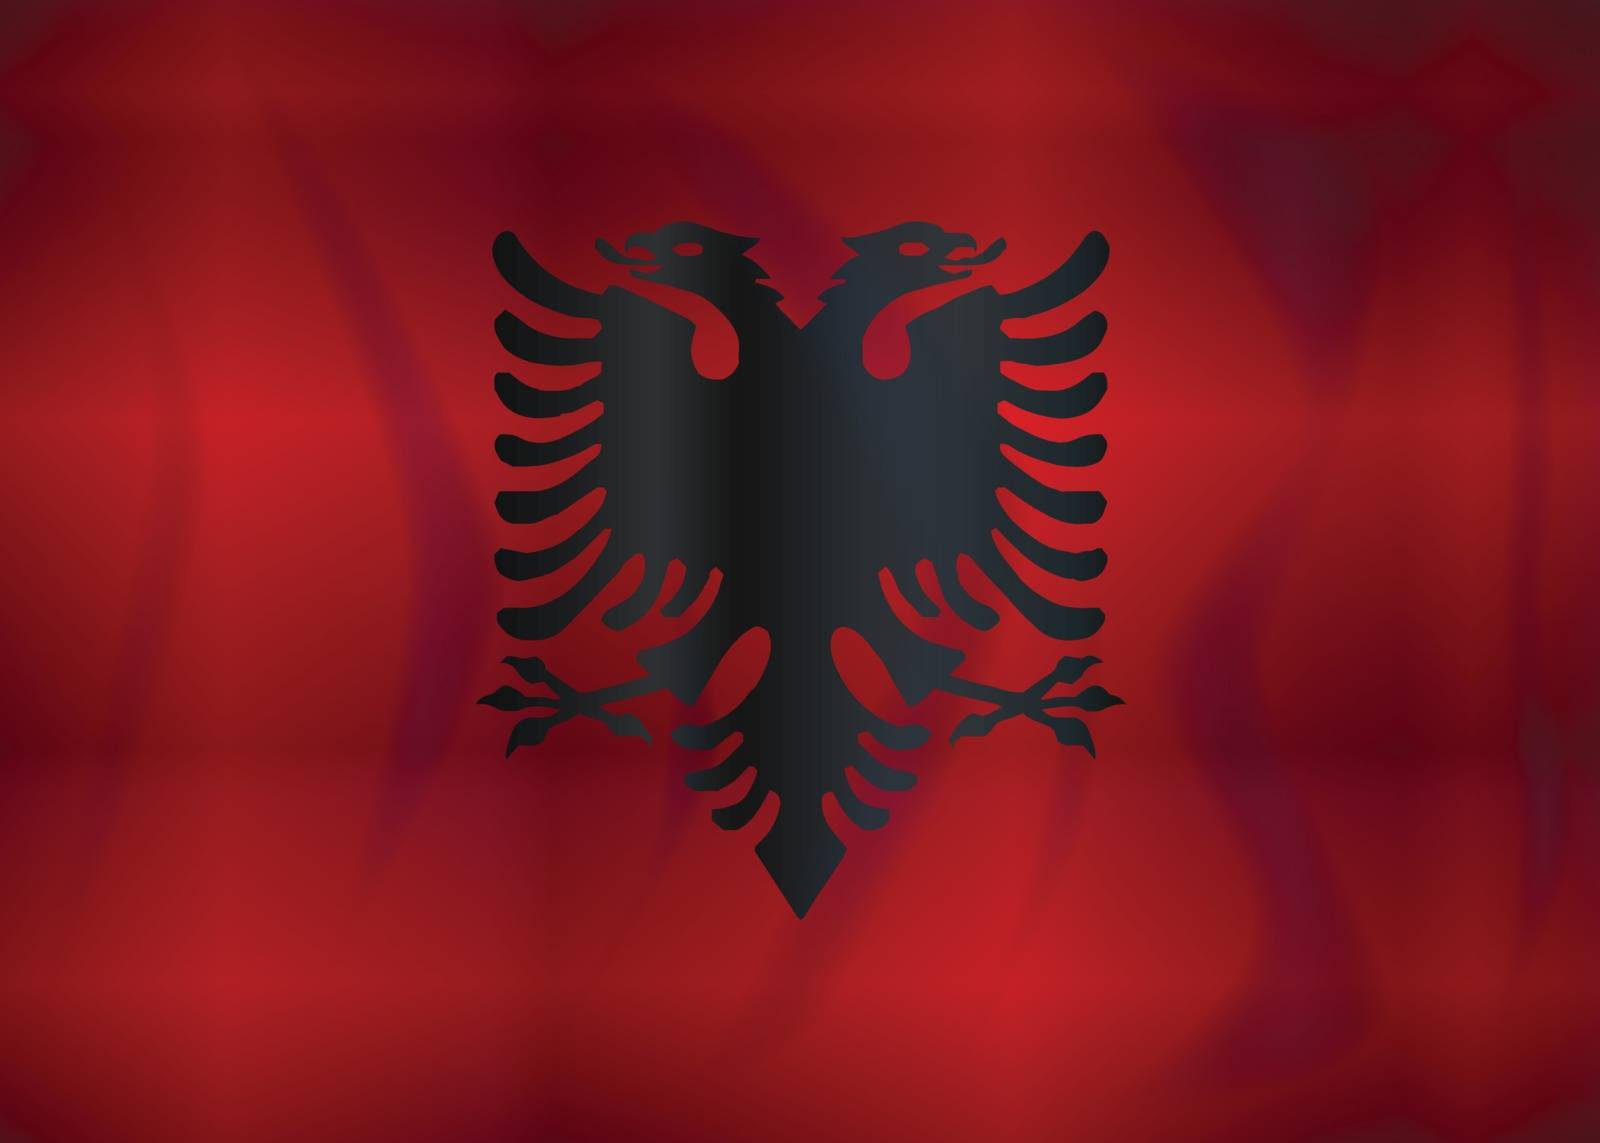 The flag of Albania with national emblem